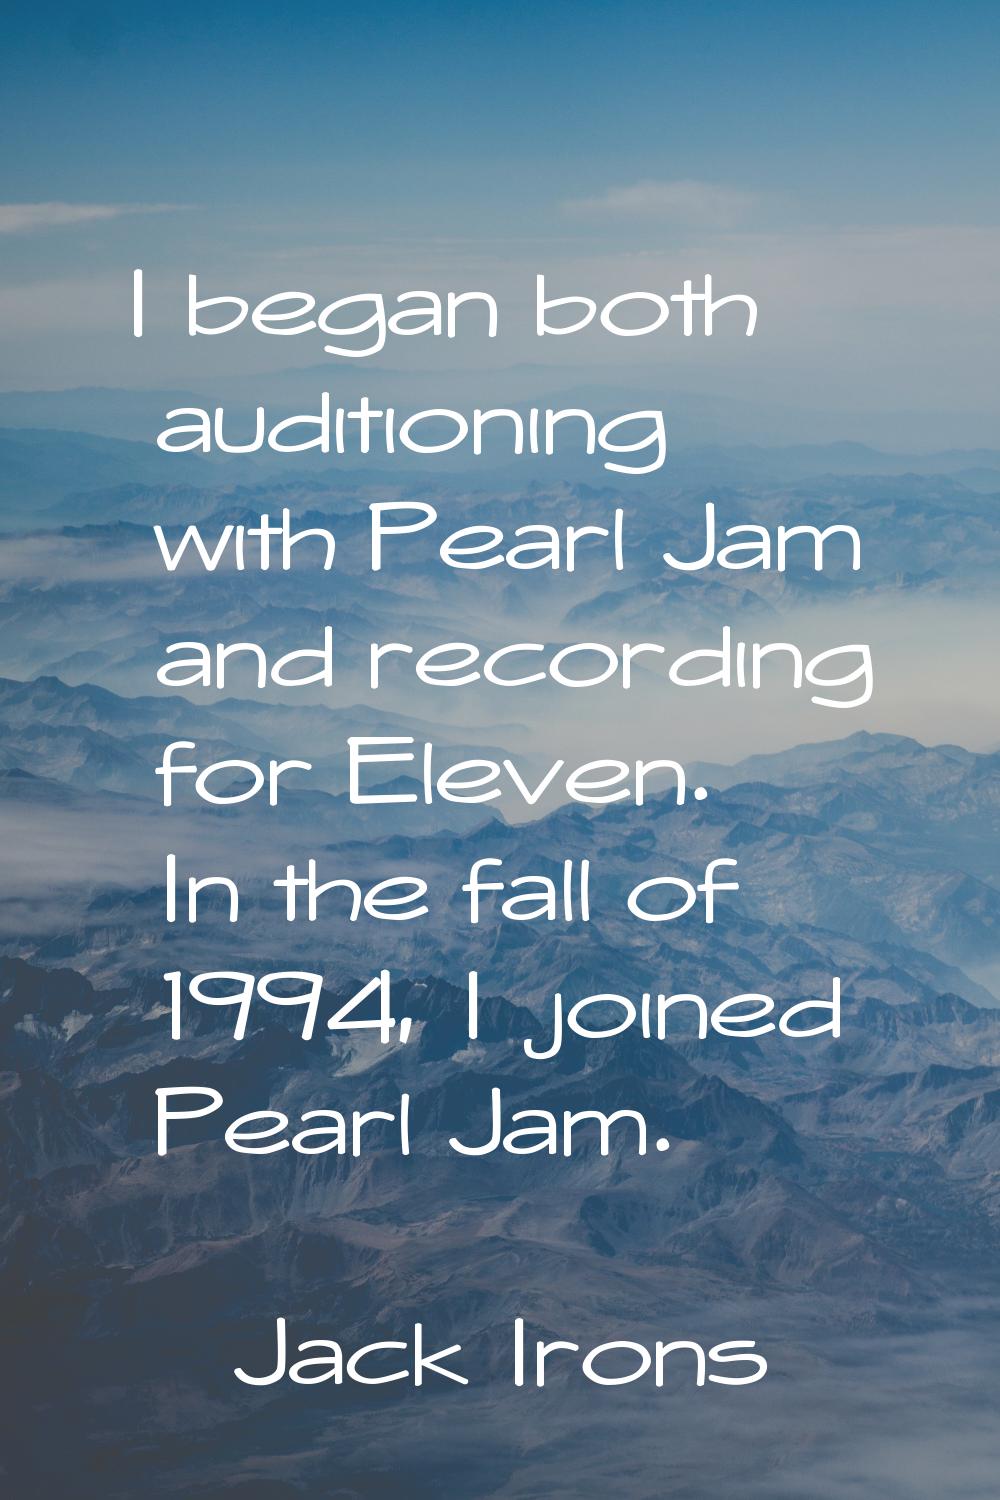 I began both auditioning with Pearl Jam and recording for Eleven. In the fall of 1994, I joined Pea